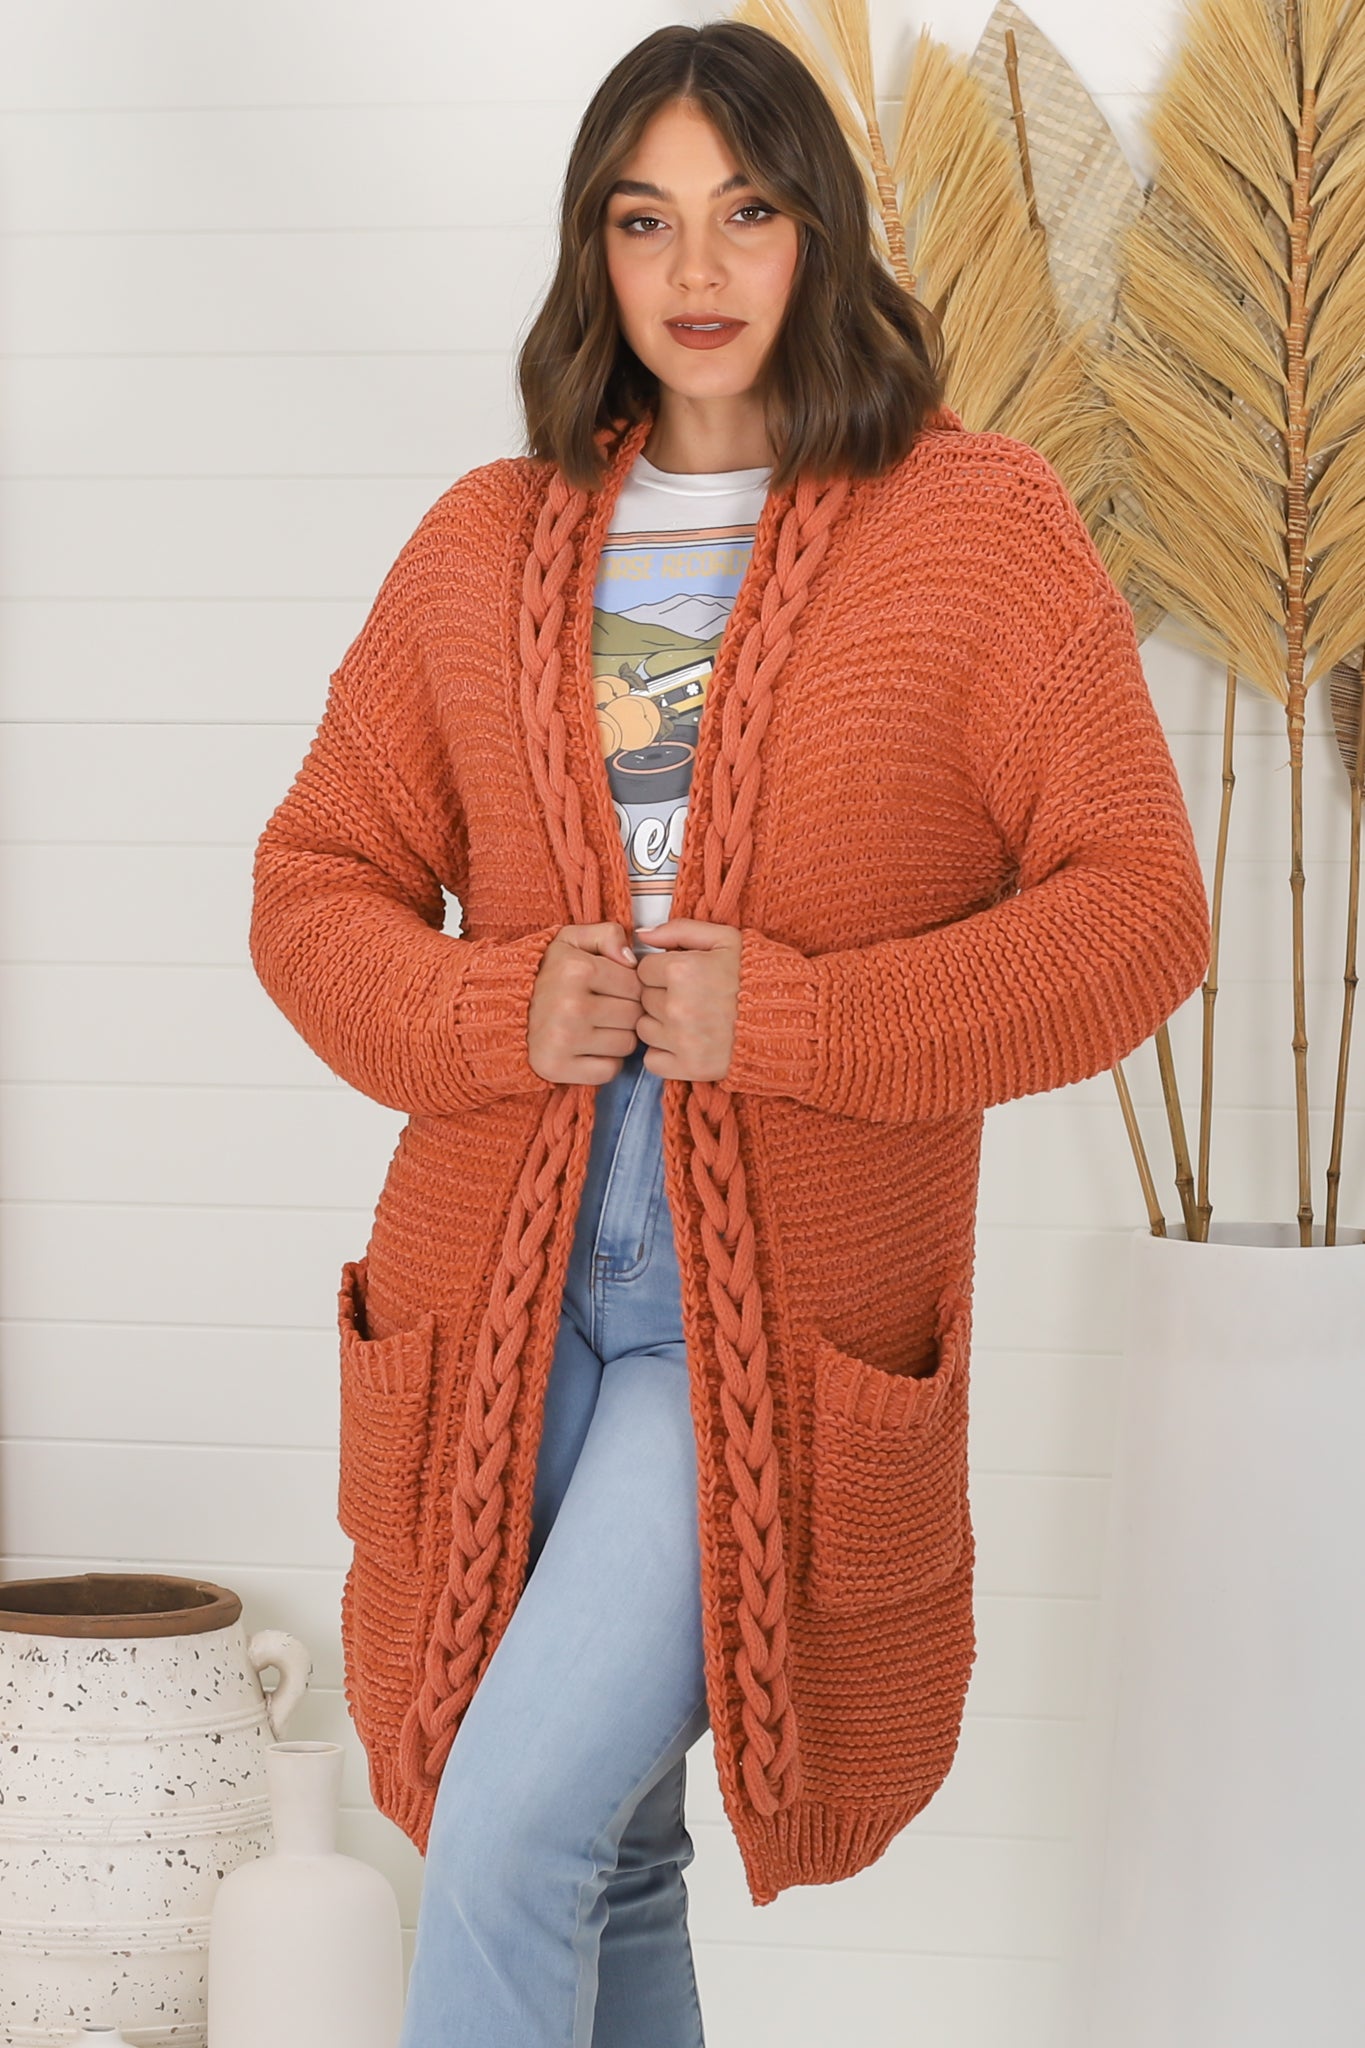 Toolara Cardigan - Thick Cable Knit Hooded Cardigan with Pocket in Rust